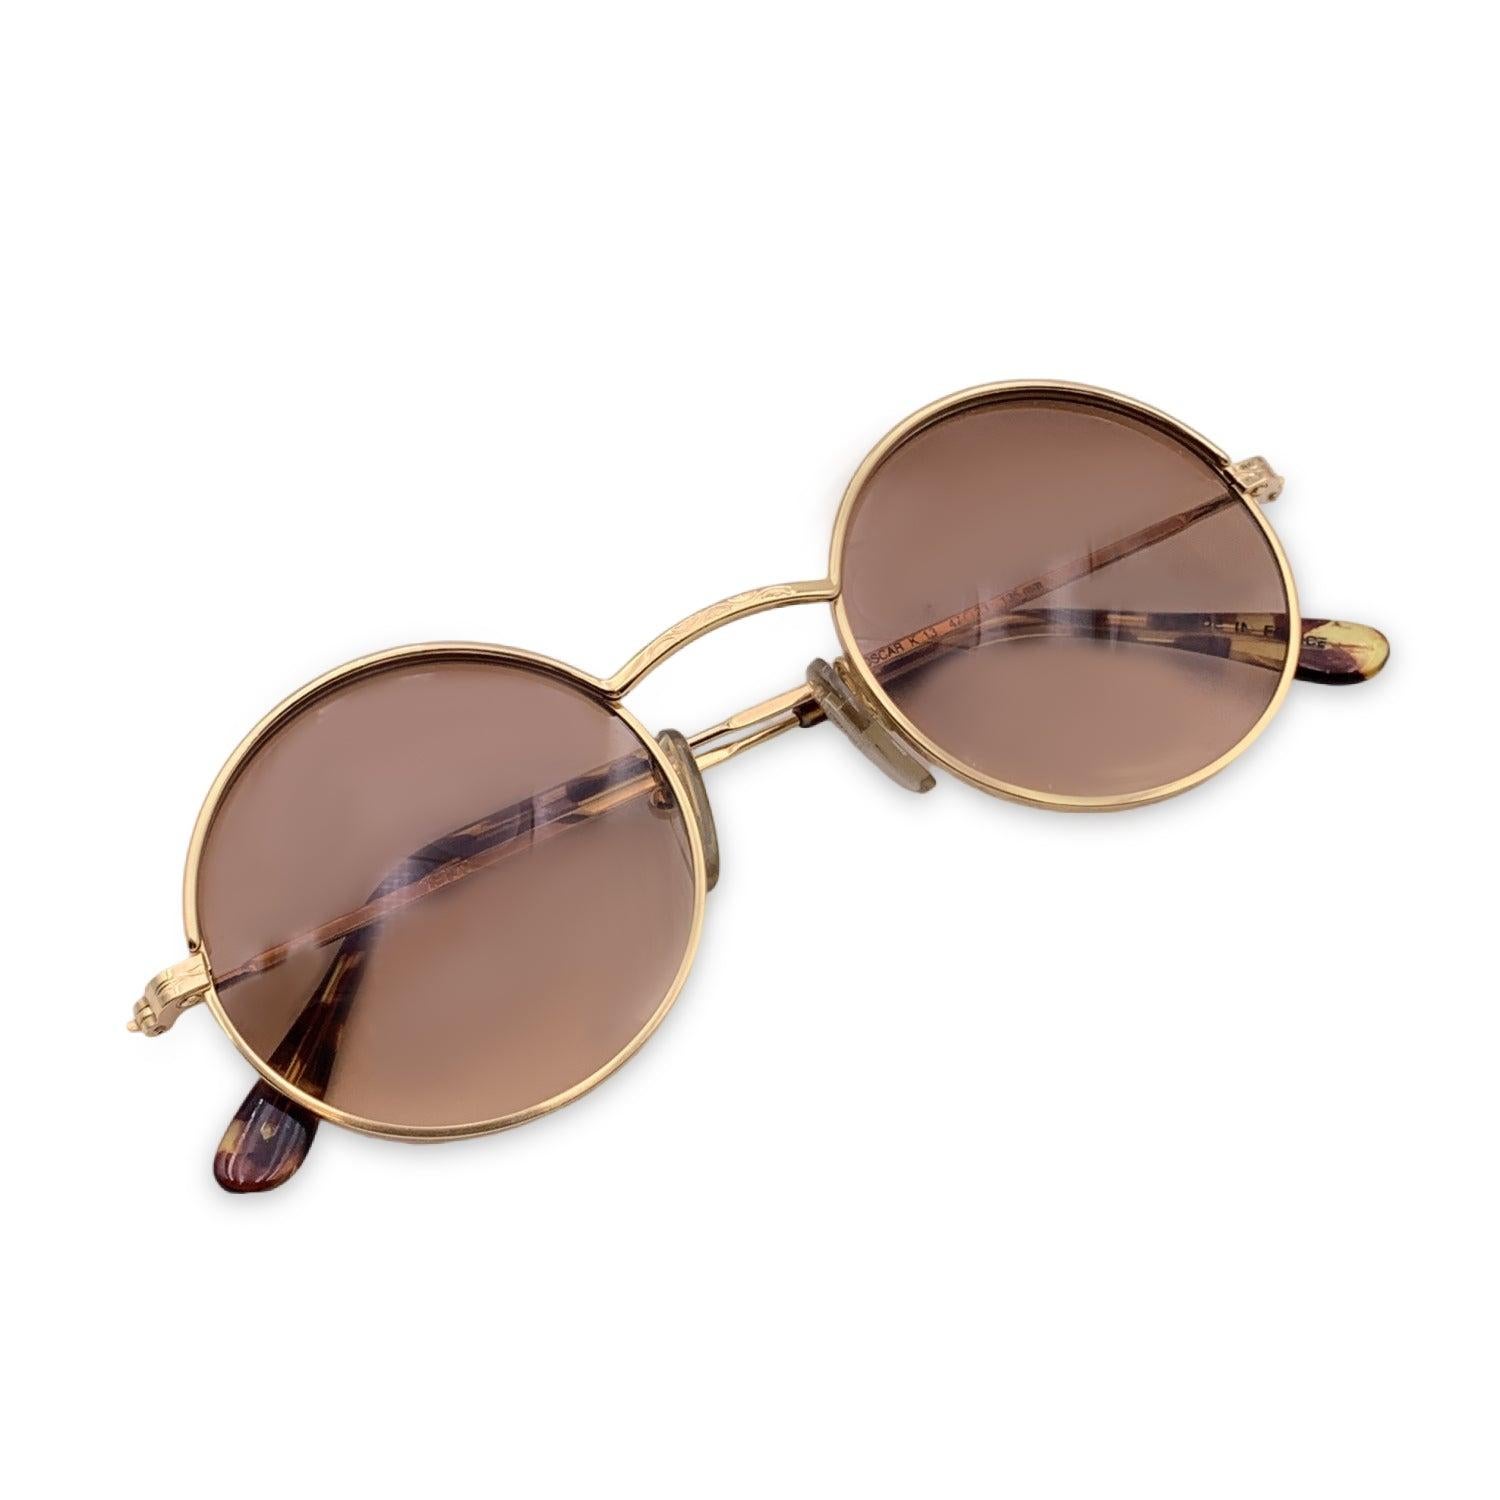 Vintage KENZO Oval sunglasses. Model. Oscar K 13 Size: 47/23 135 mm. Gold metal frame and temples with a brown tortoise acetate on the finish. 100% Total UVA/UVB protection .Gradient Brown lenses. Made in France. Details MATERIAL: Metal COLOR: Gold